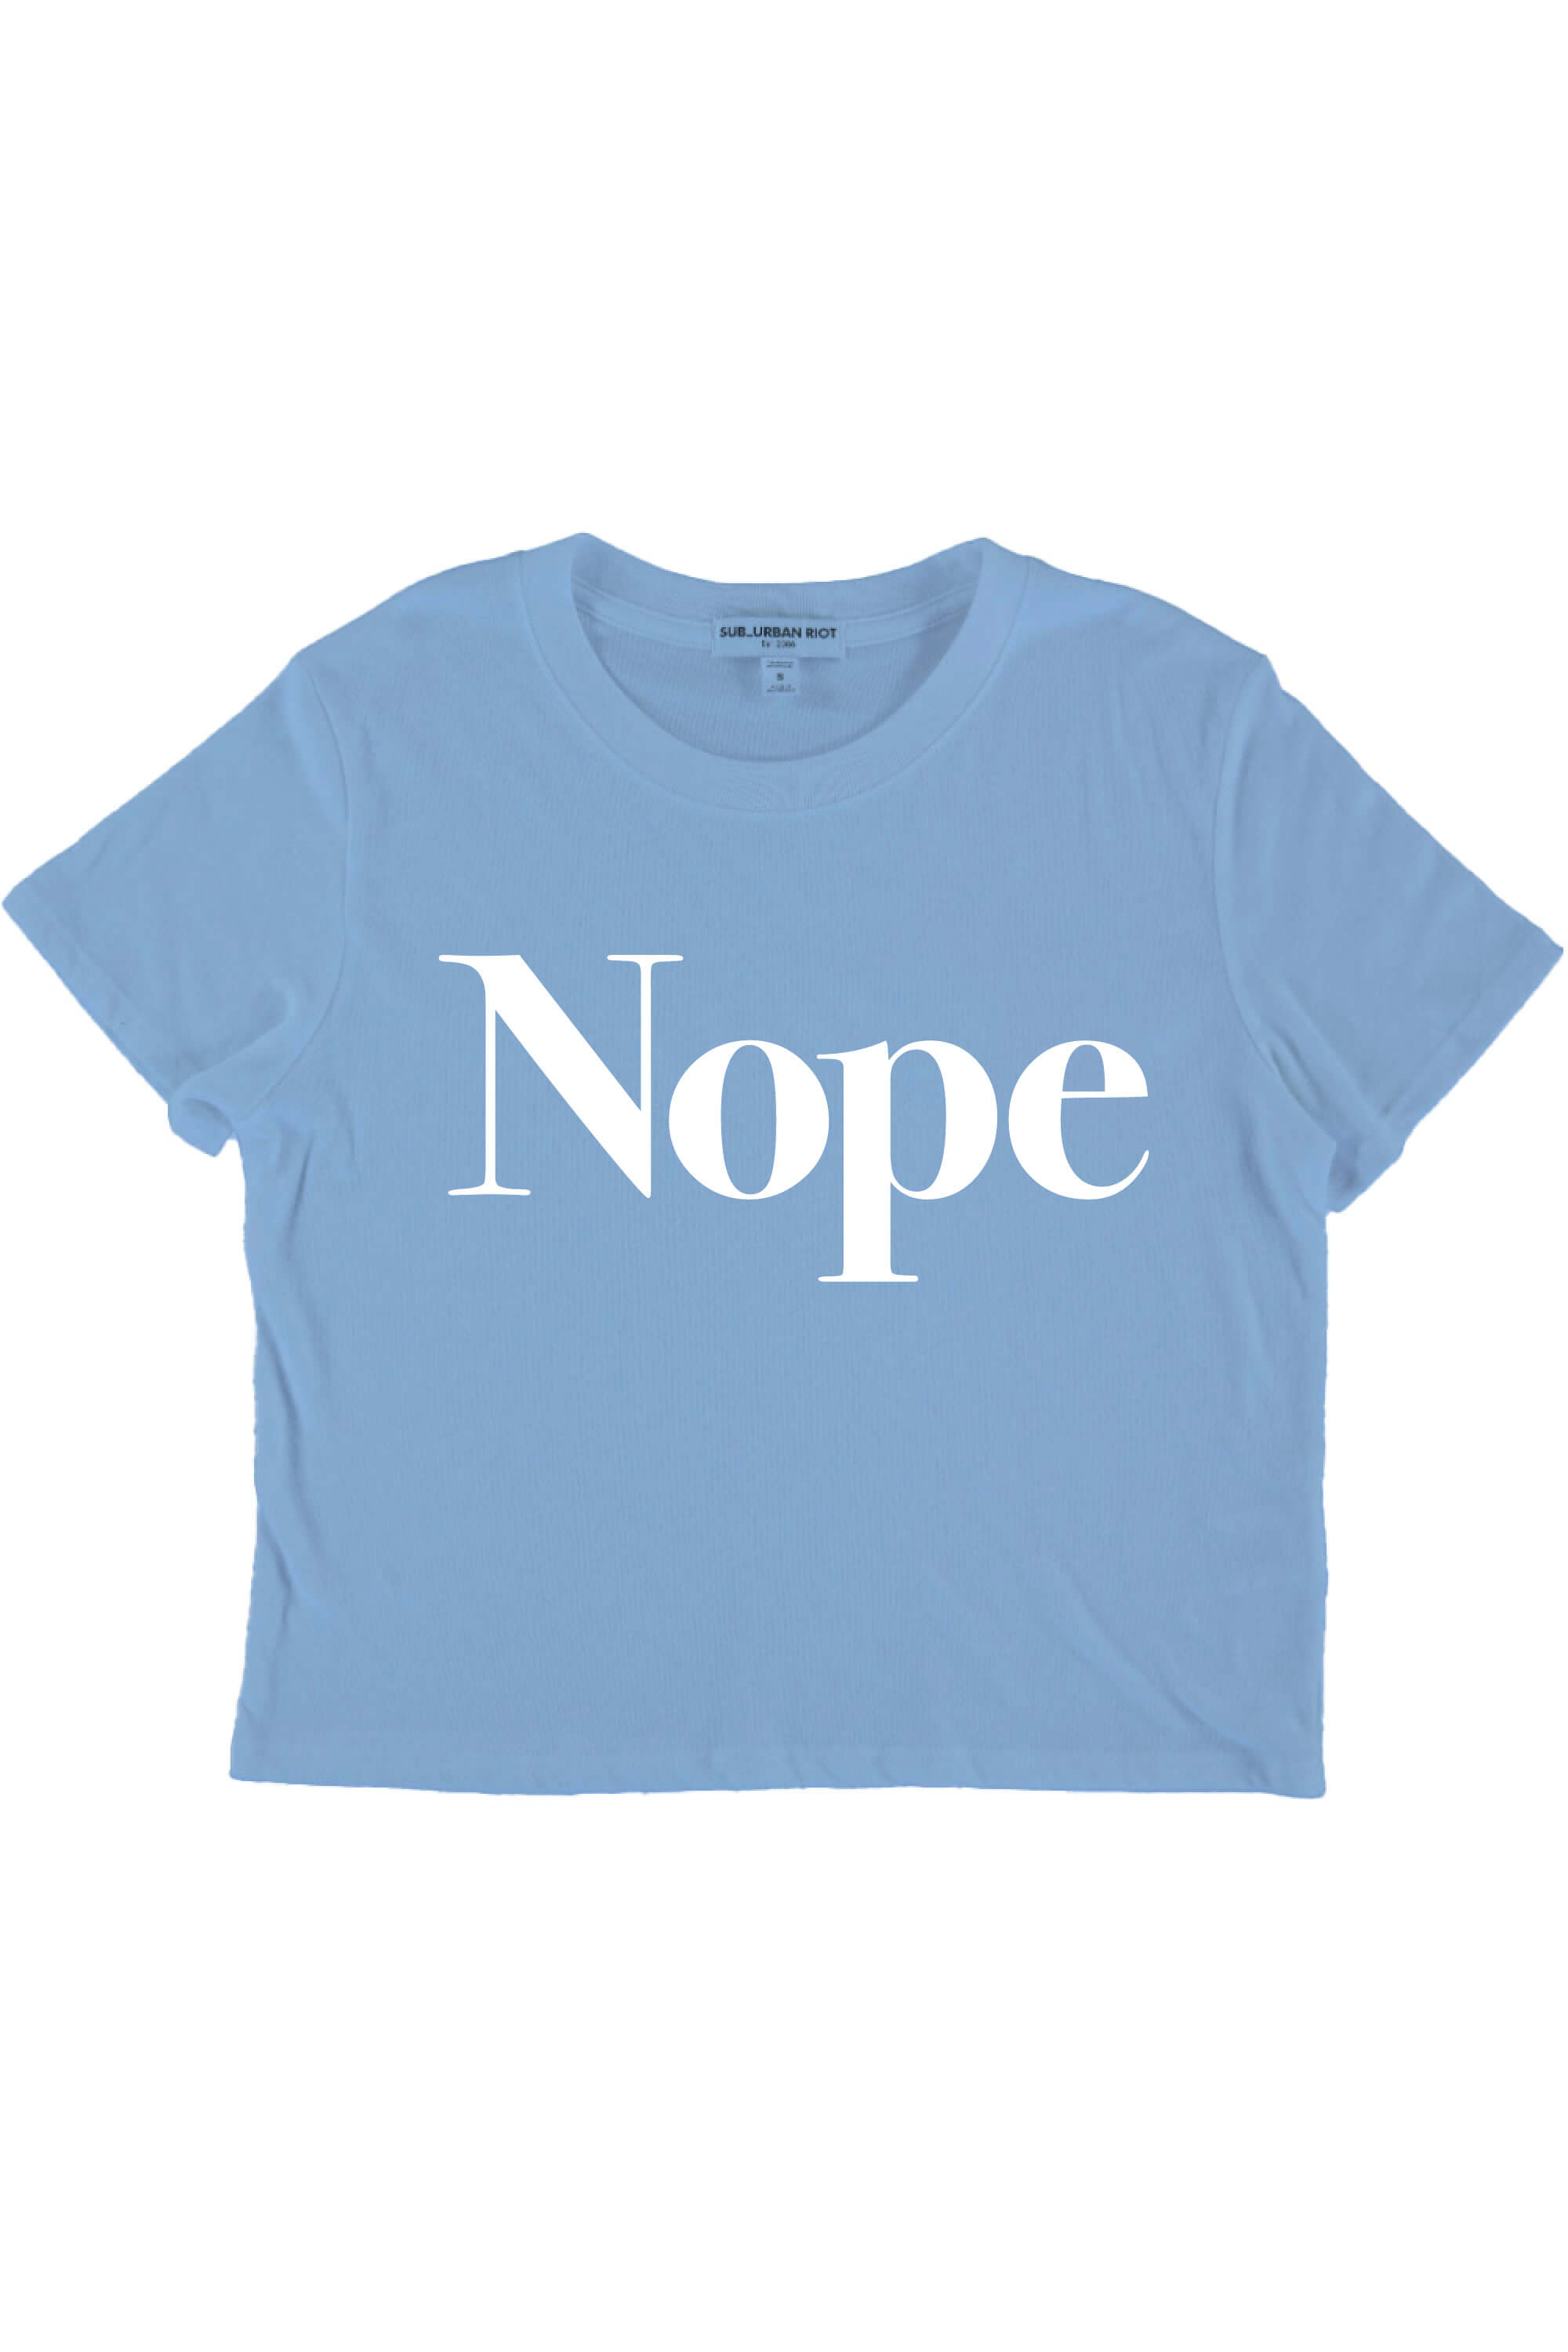 NOPE YOUTH SIZE CROP TEE